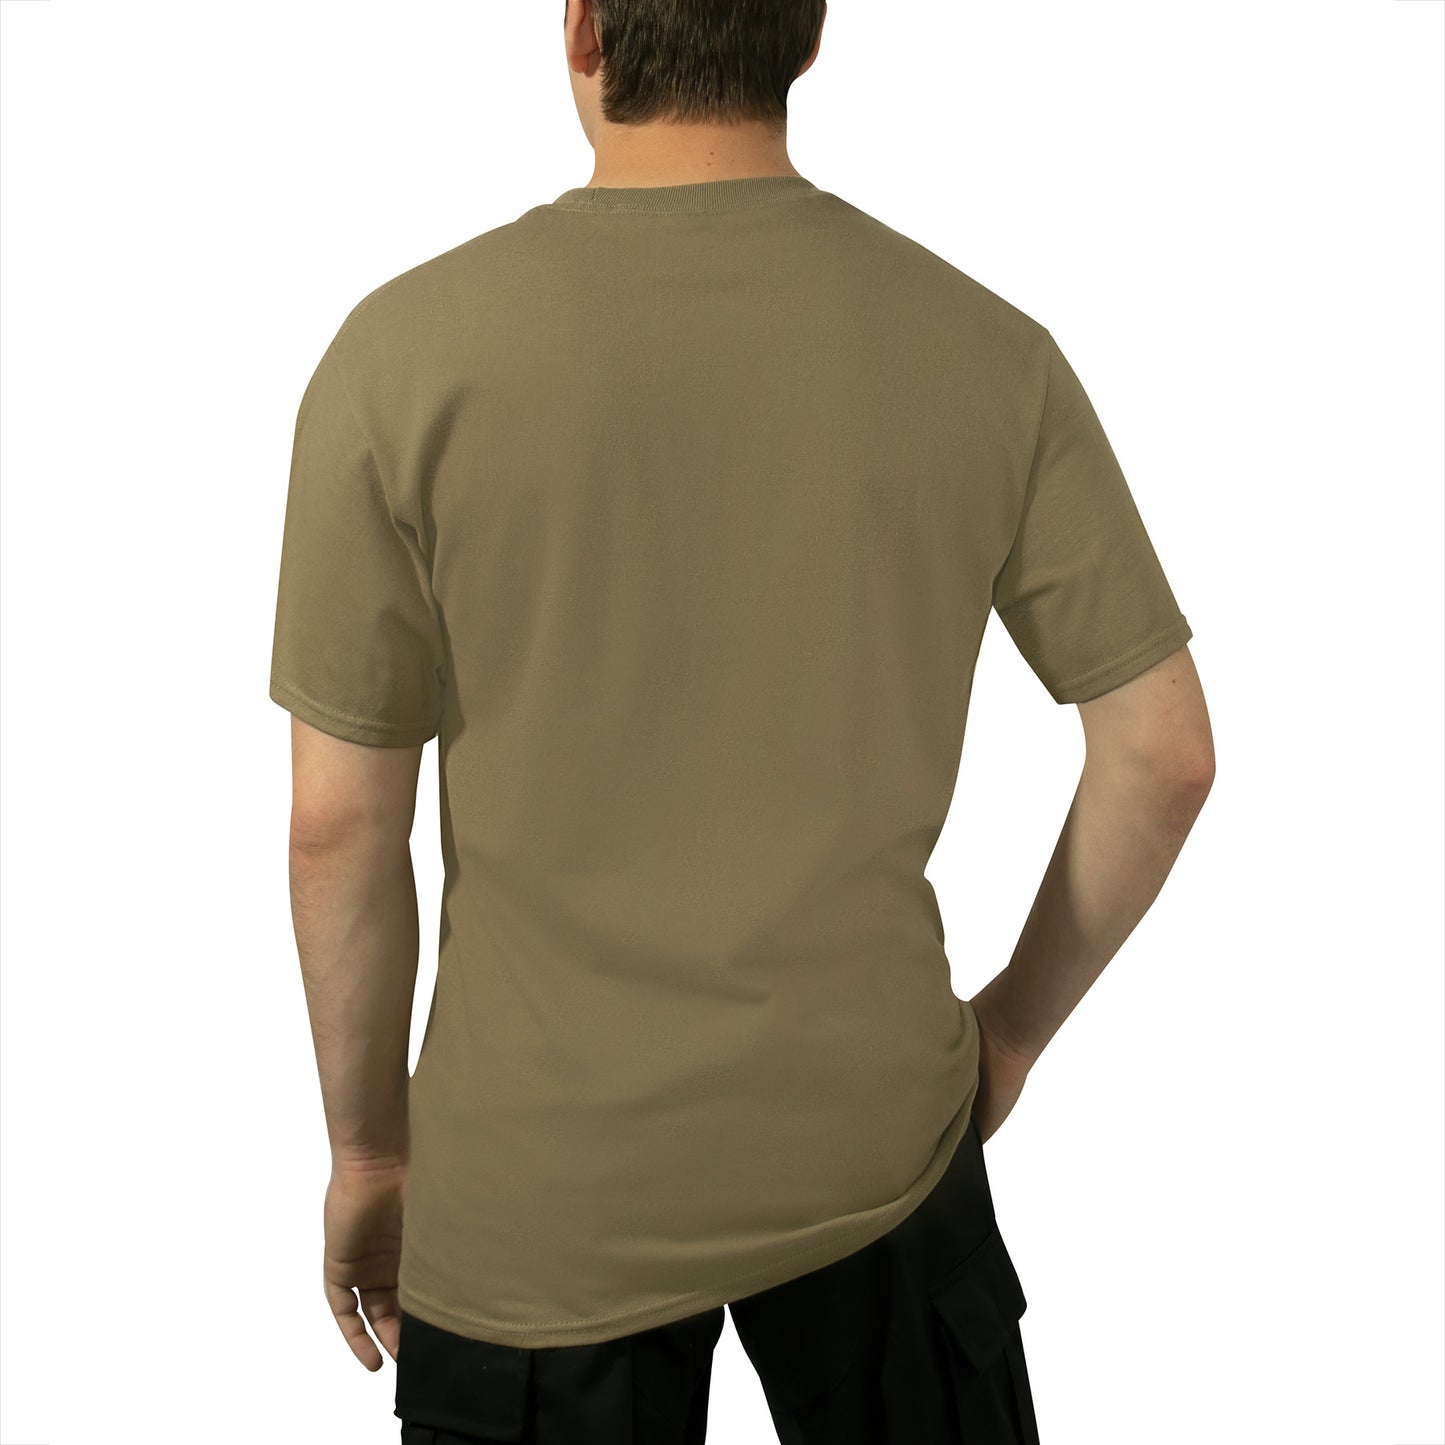 Rothco AR 670-1 Coyote Brown Marines Physical Training T-Shirt